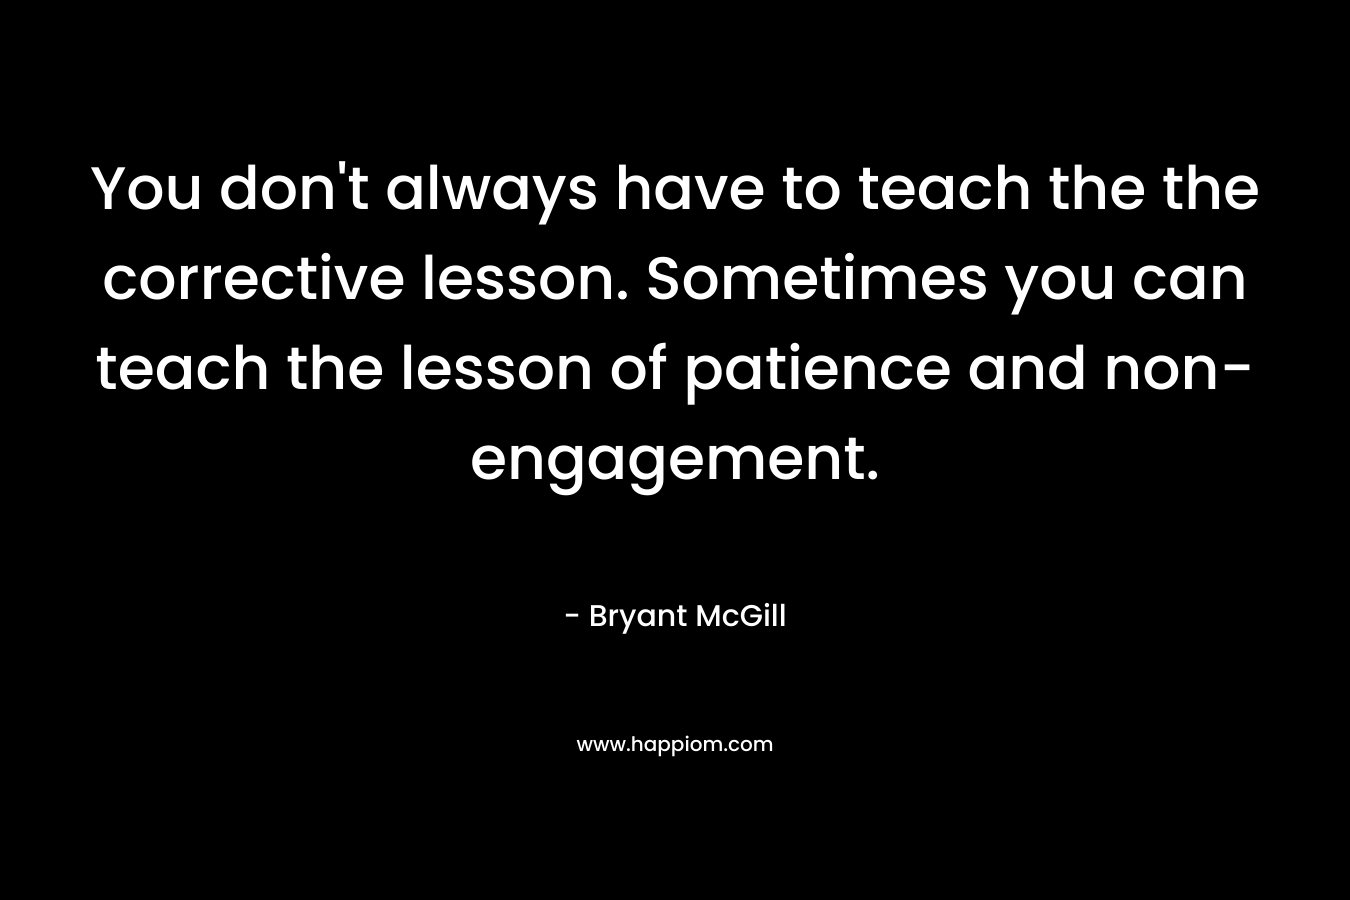 You don't always have to teach the the corrective lesson. Sometimes you can teach the lesson of patience and non-engagement.